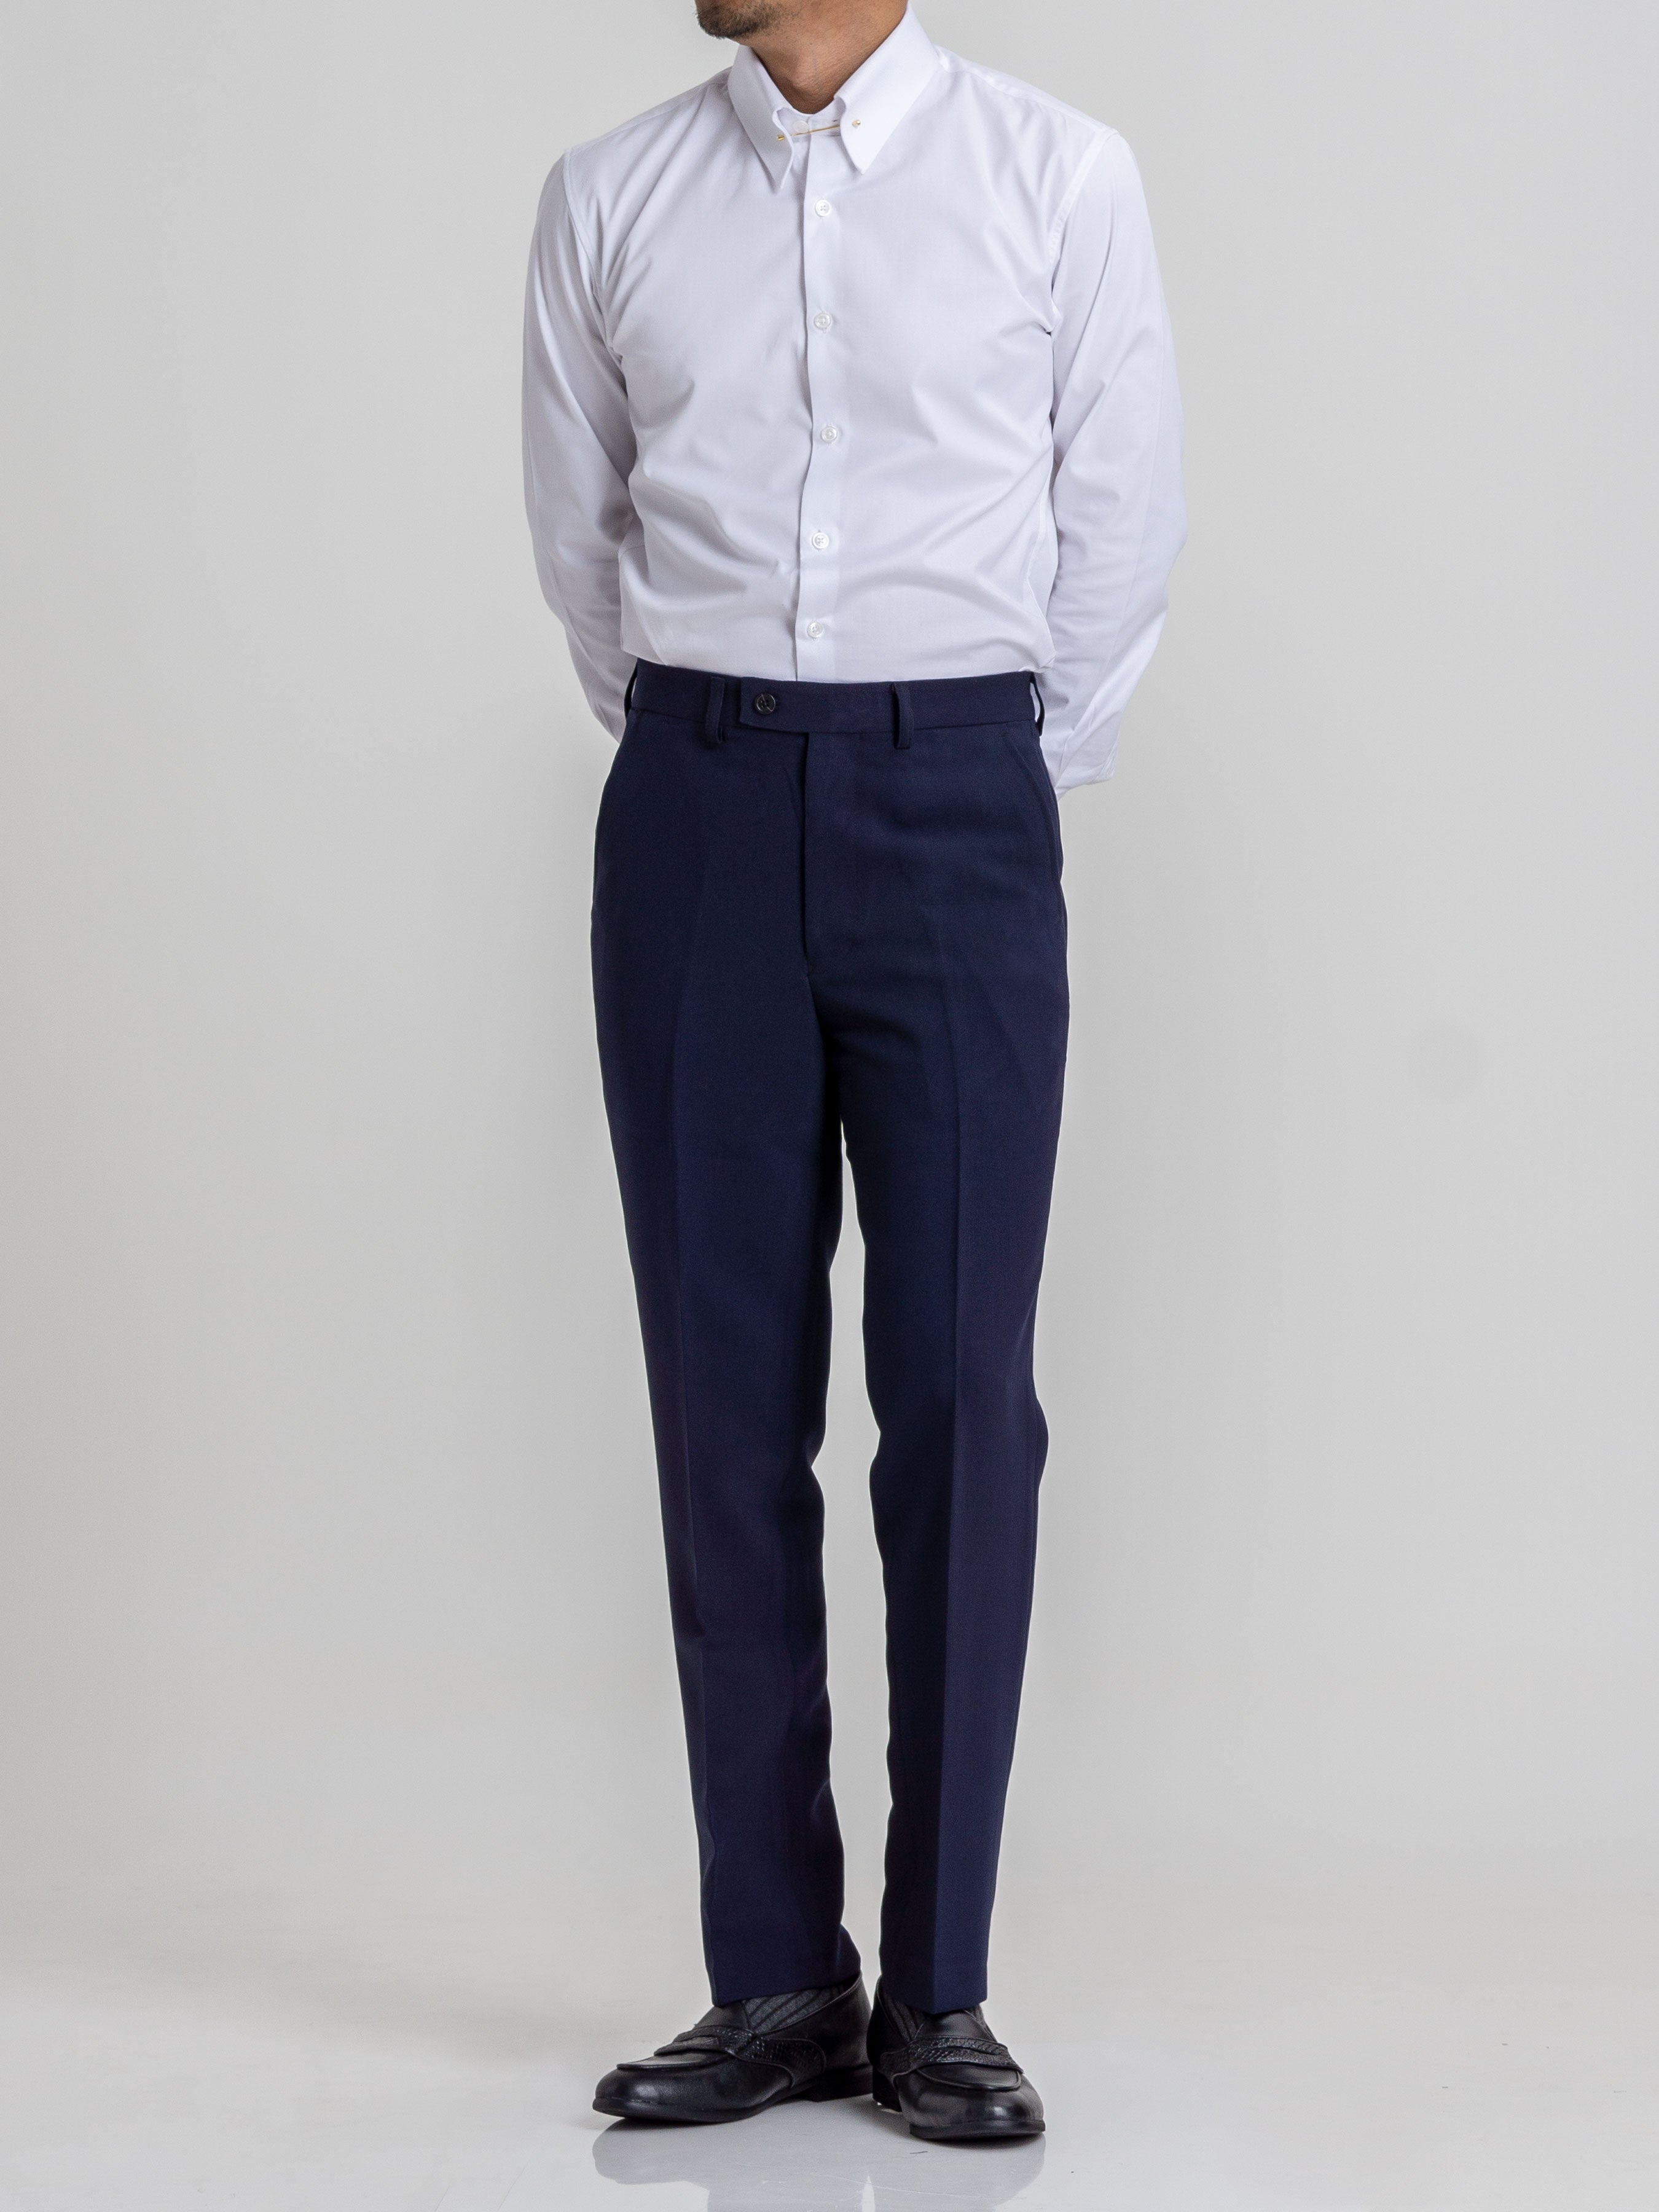 Trousers With Belt Loop -  Navy Blue Plain (Stretchable) - Zeve Shoes